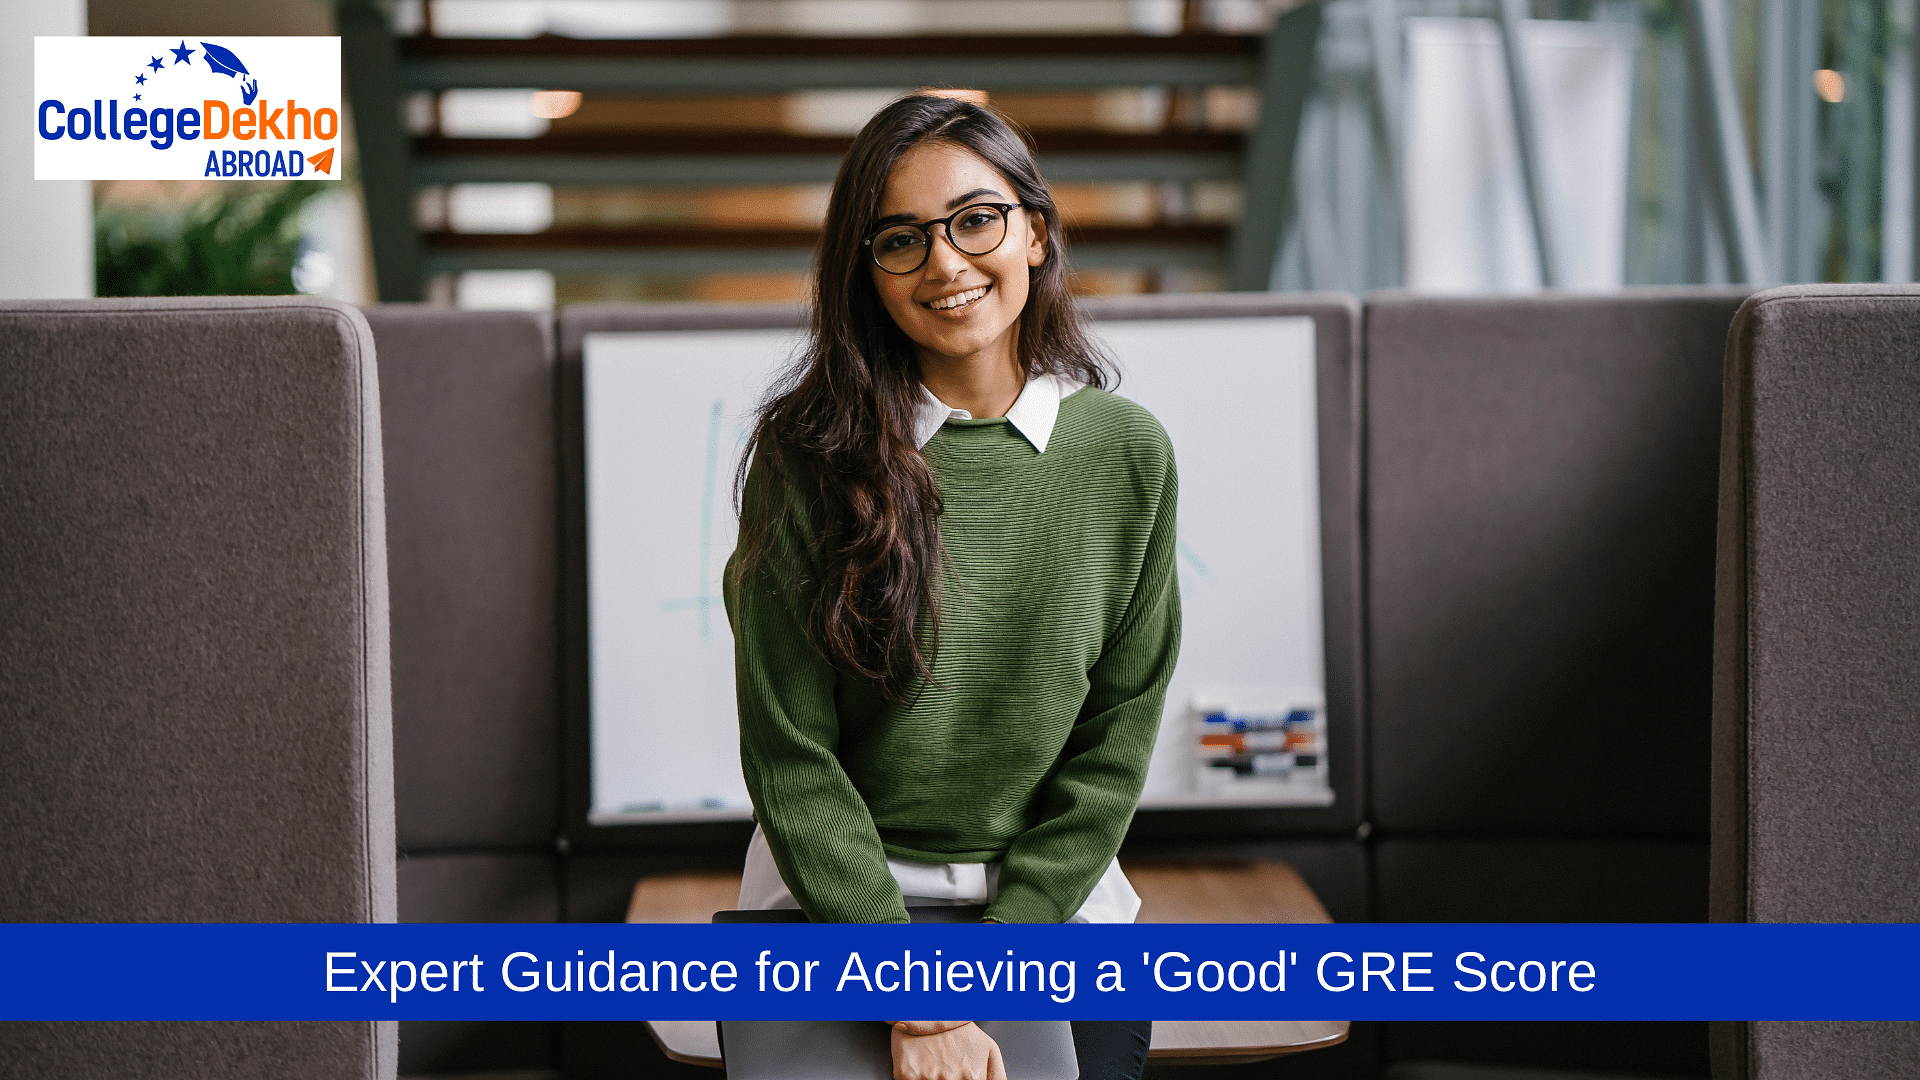 Here's You Should Take Expert Guidance for Achieving a Good GRE Score